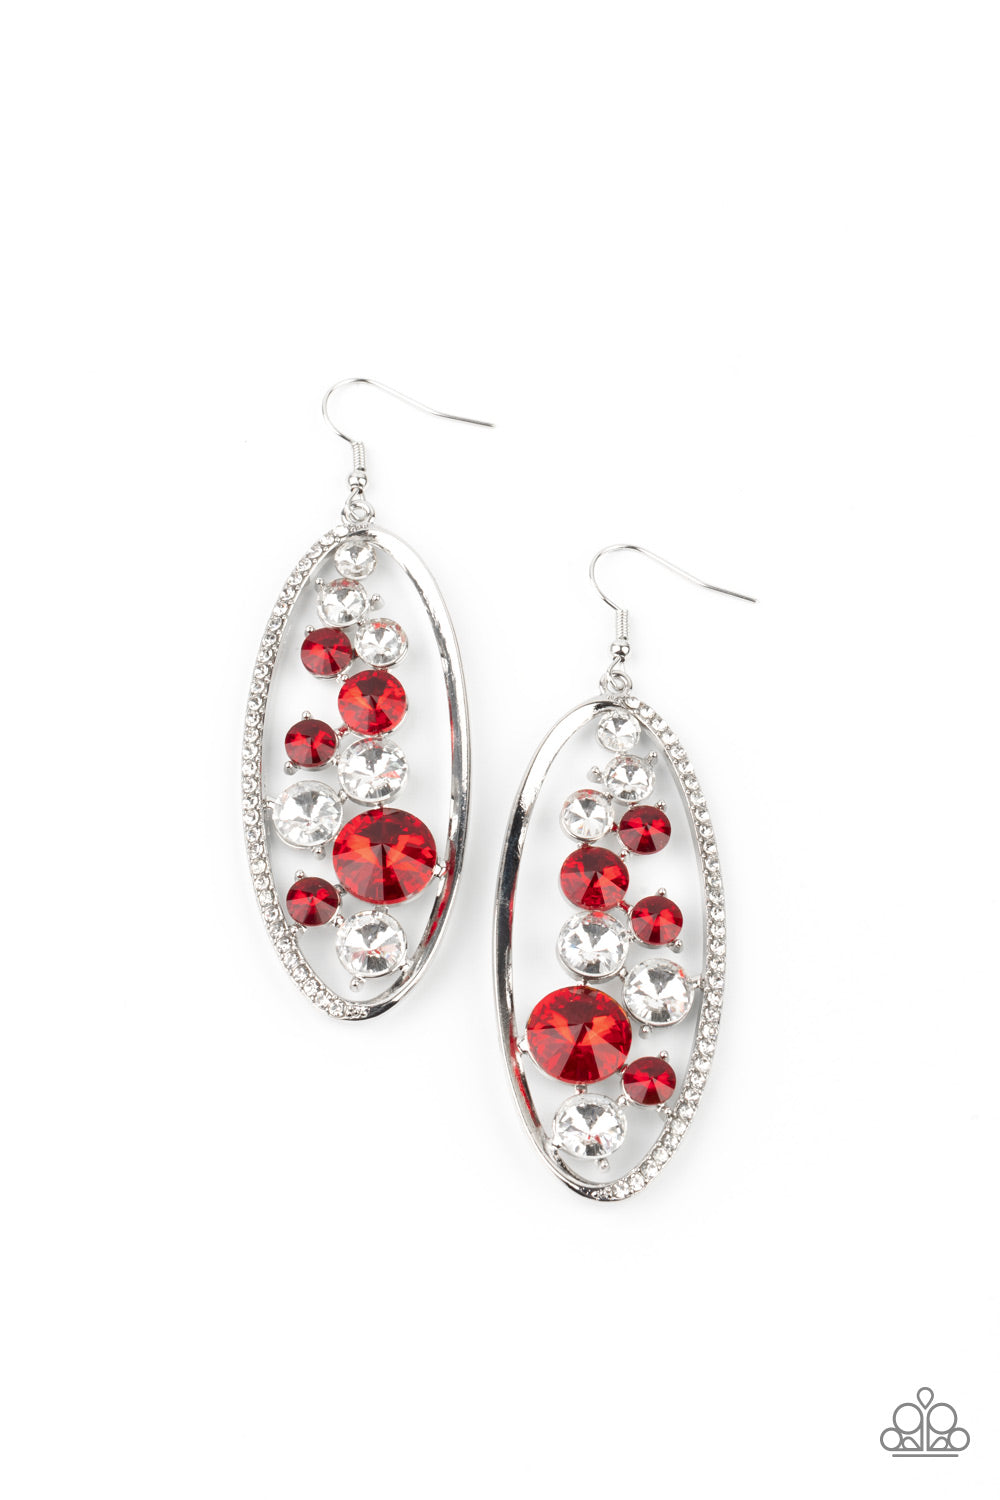 Rock Candy Bubbly Red Earring - Paparazzi Accessories  An oversized collection of glassy white and glittery red rhinestones sparkle inside a silver oval frame. One side of the frame is encrusted in dainty white rhinestones, adding a refined flair to the bubbly lure. Earring attaches to a standard fishhook fitting.  All Paparazzi Accessories are lead free and nickel free!  Sold as one pair of earrings.